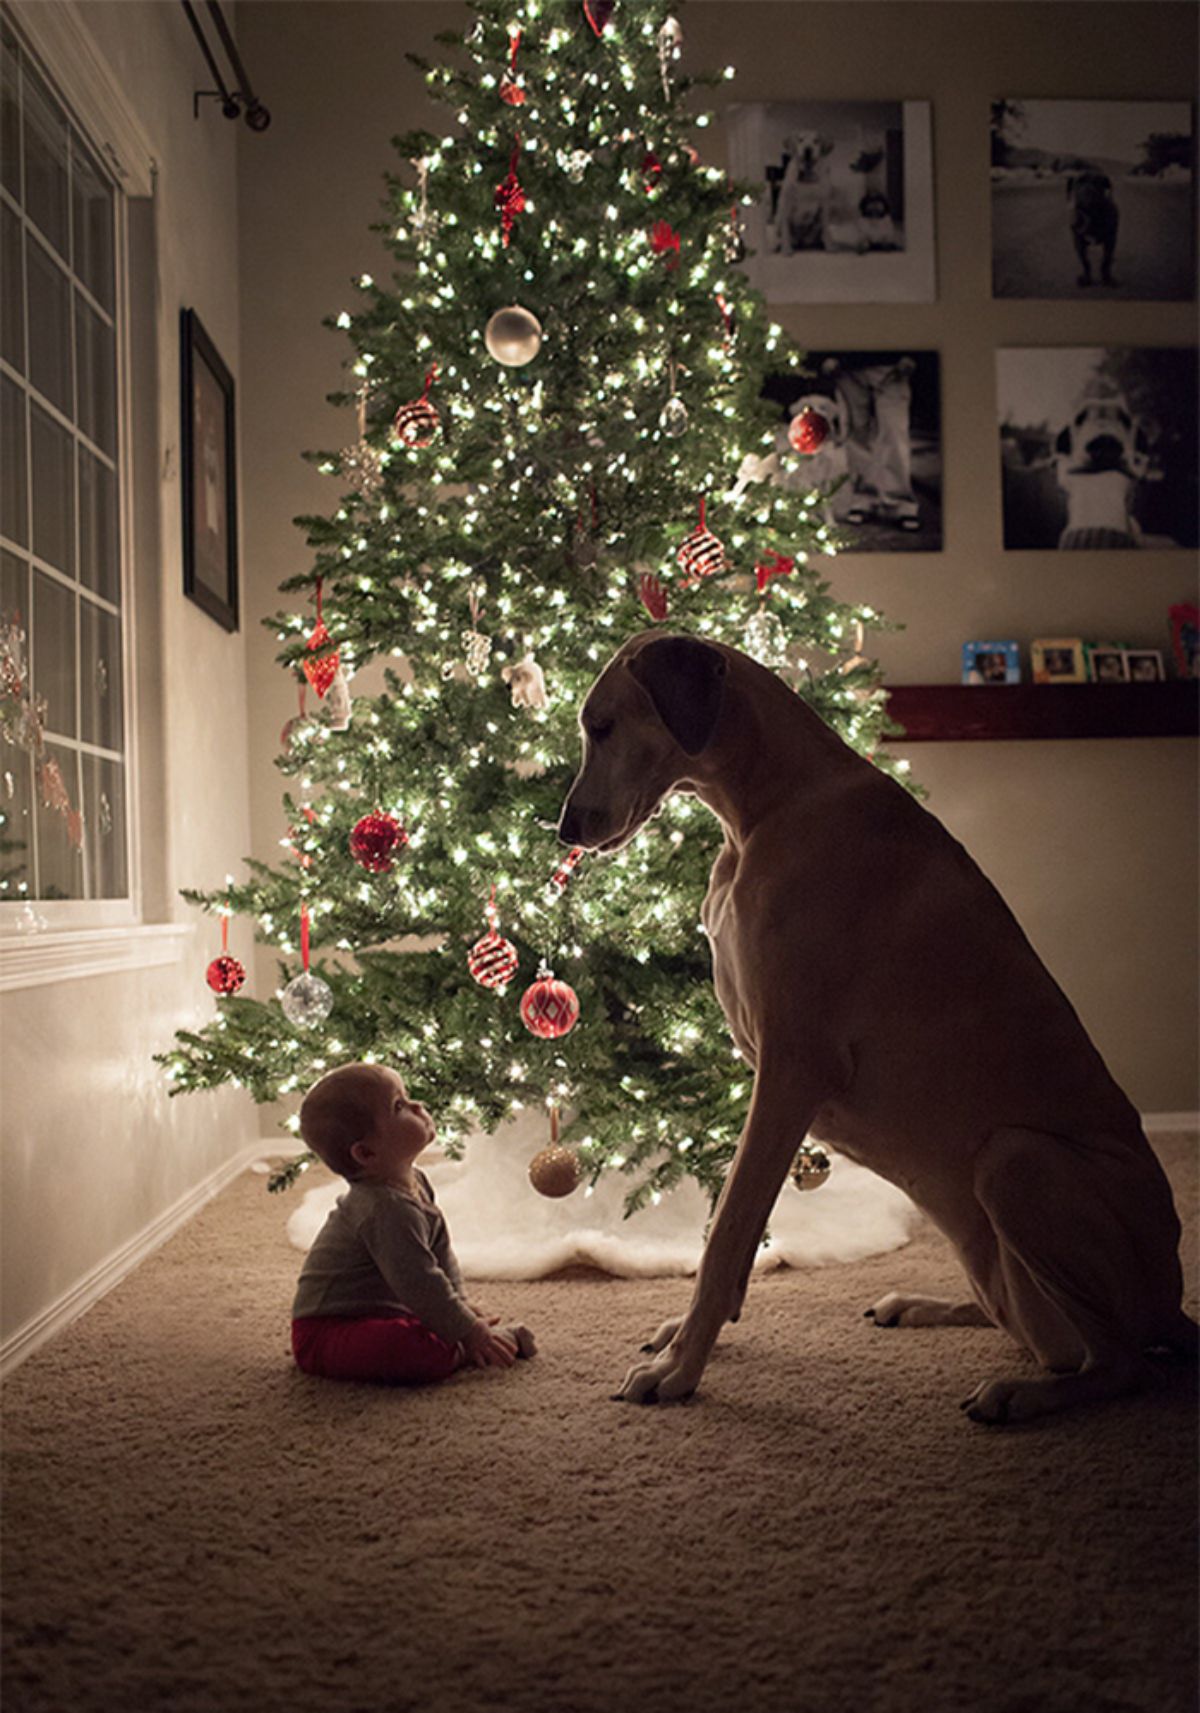 tall thin brown dog sitting and looking down at a baby on the carpet looking up with a lit up christmas behind them